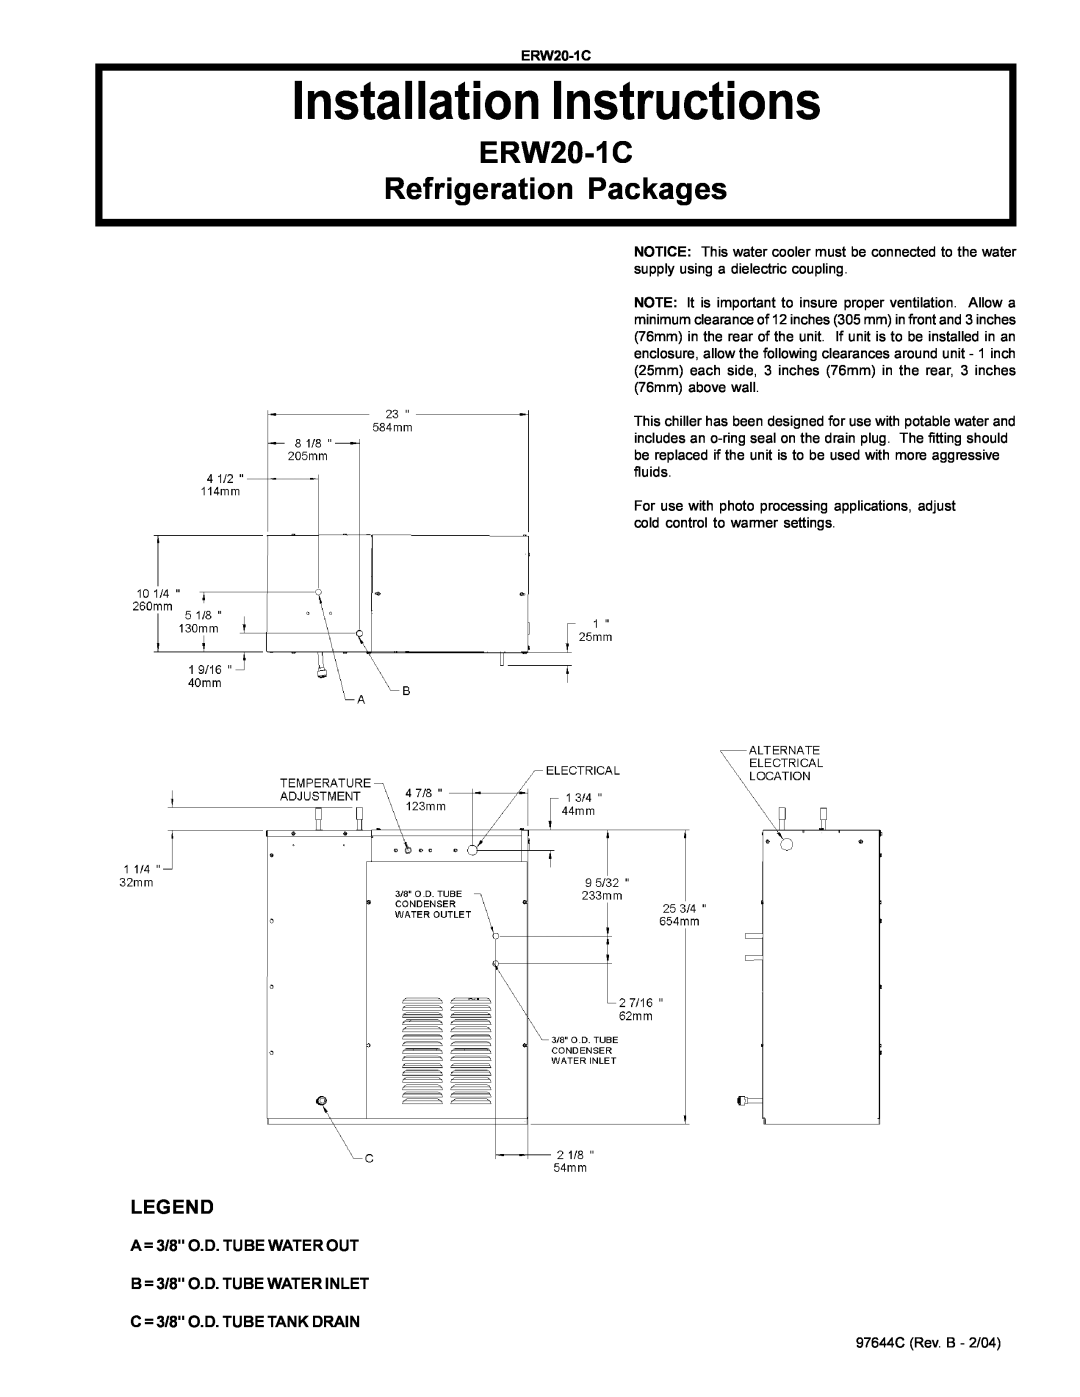 Elkay installation instructions Installation Instructions, ERW20-1C Refrigeration Packages, A = 3/8 O.D. TUBE WATER OUT 